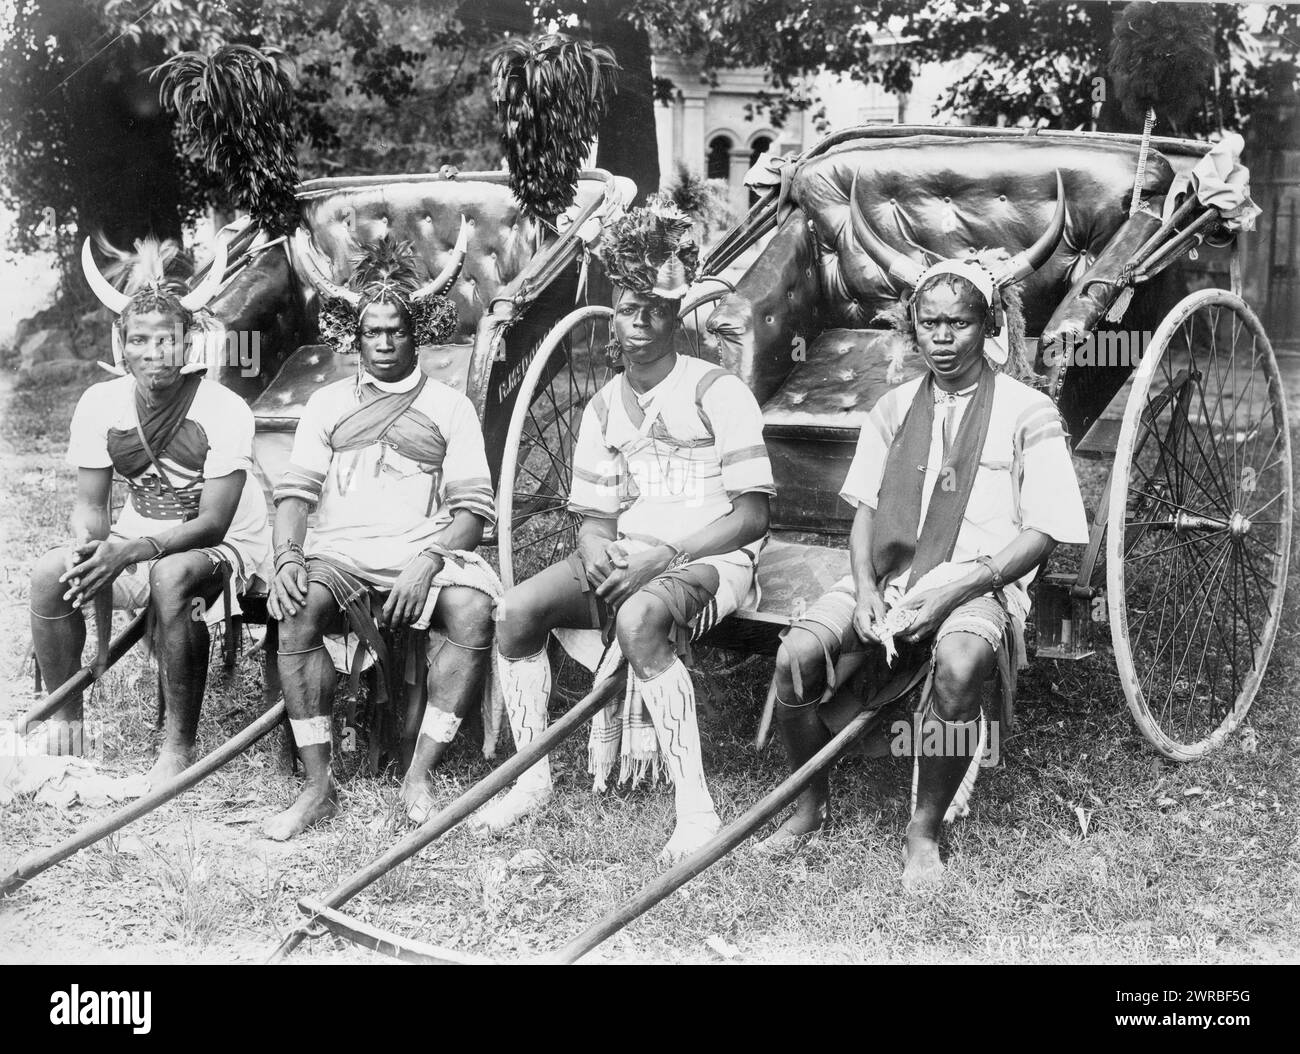 Ricksha boys, Durban, South Africa, Photo shows four young men sitting at the front of rickshaws, facing front, three are wearing horned headdresses and the fourth is wearing a floral headdress., Carpenter, Frank G. (Frank George), 1855-1924, collector, between 1890 and 1923, Rickshaws, South Africa, Durban, 1890-1930, Group portraits, 1890-1930., Portrait photographs, 1890-1930, Group portraits, 1890-1930, 1 photographic print Stock Photo